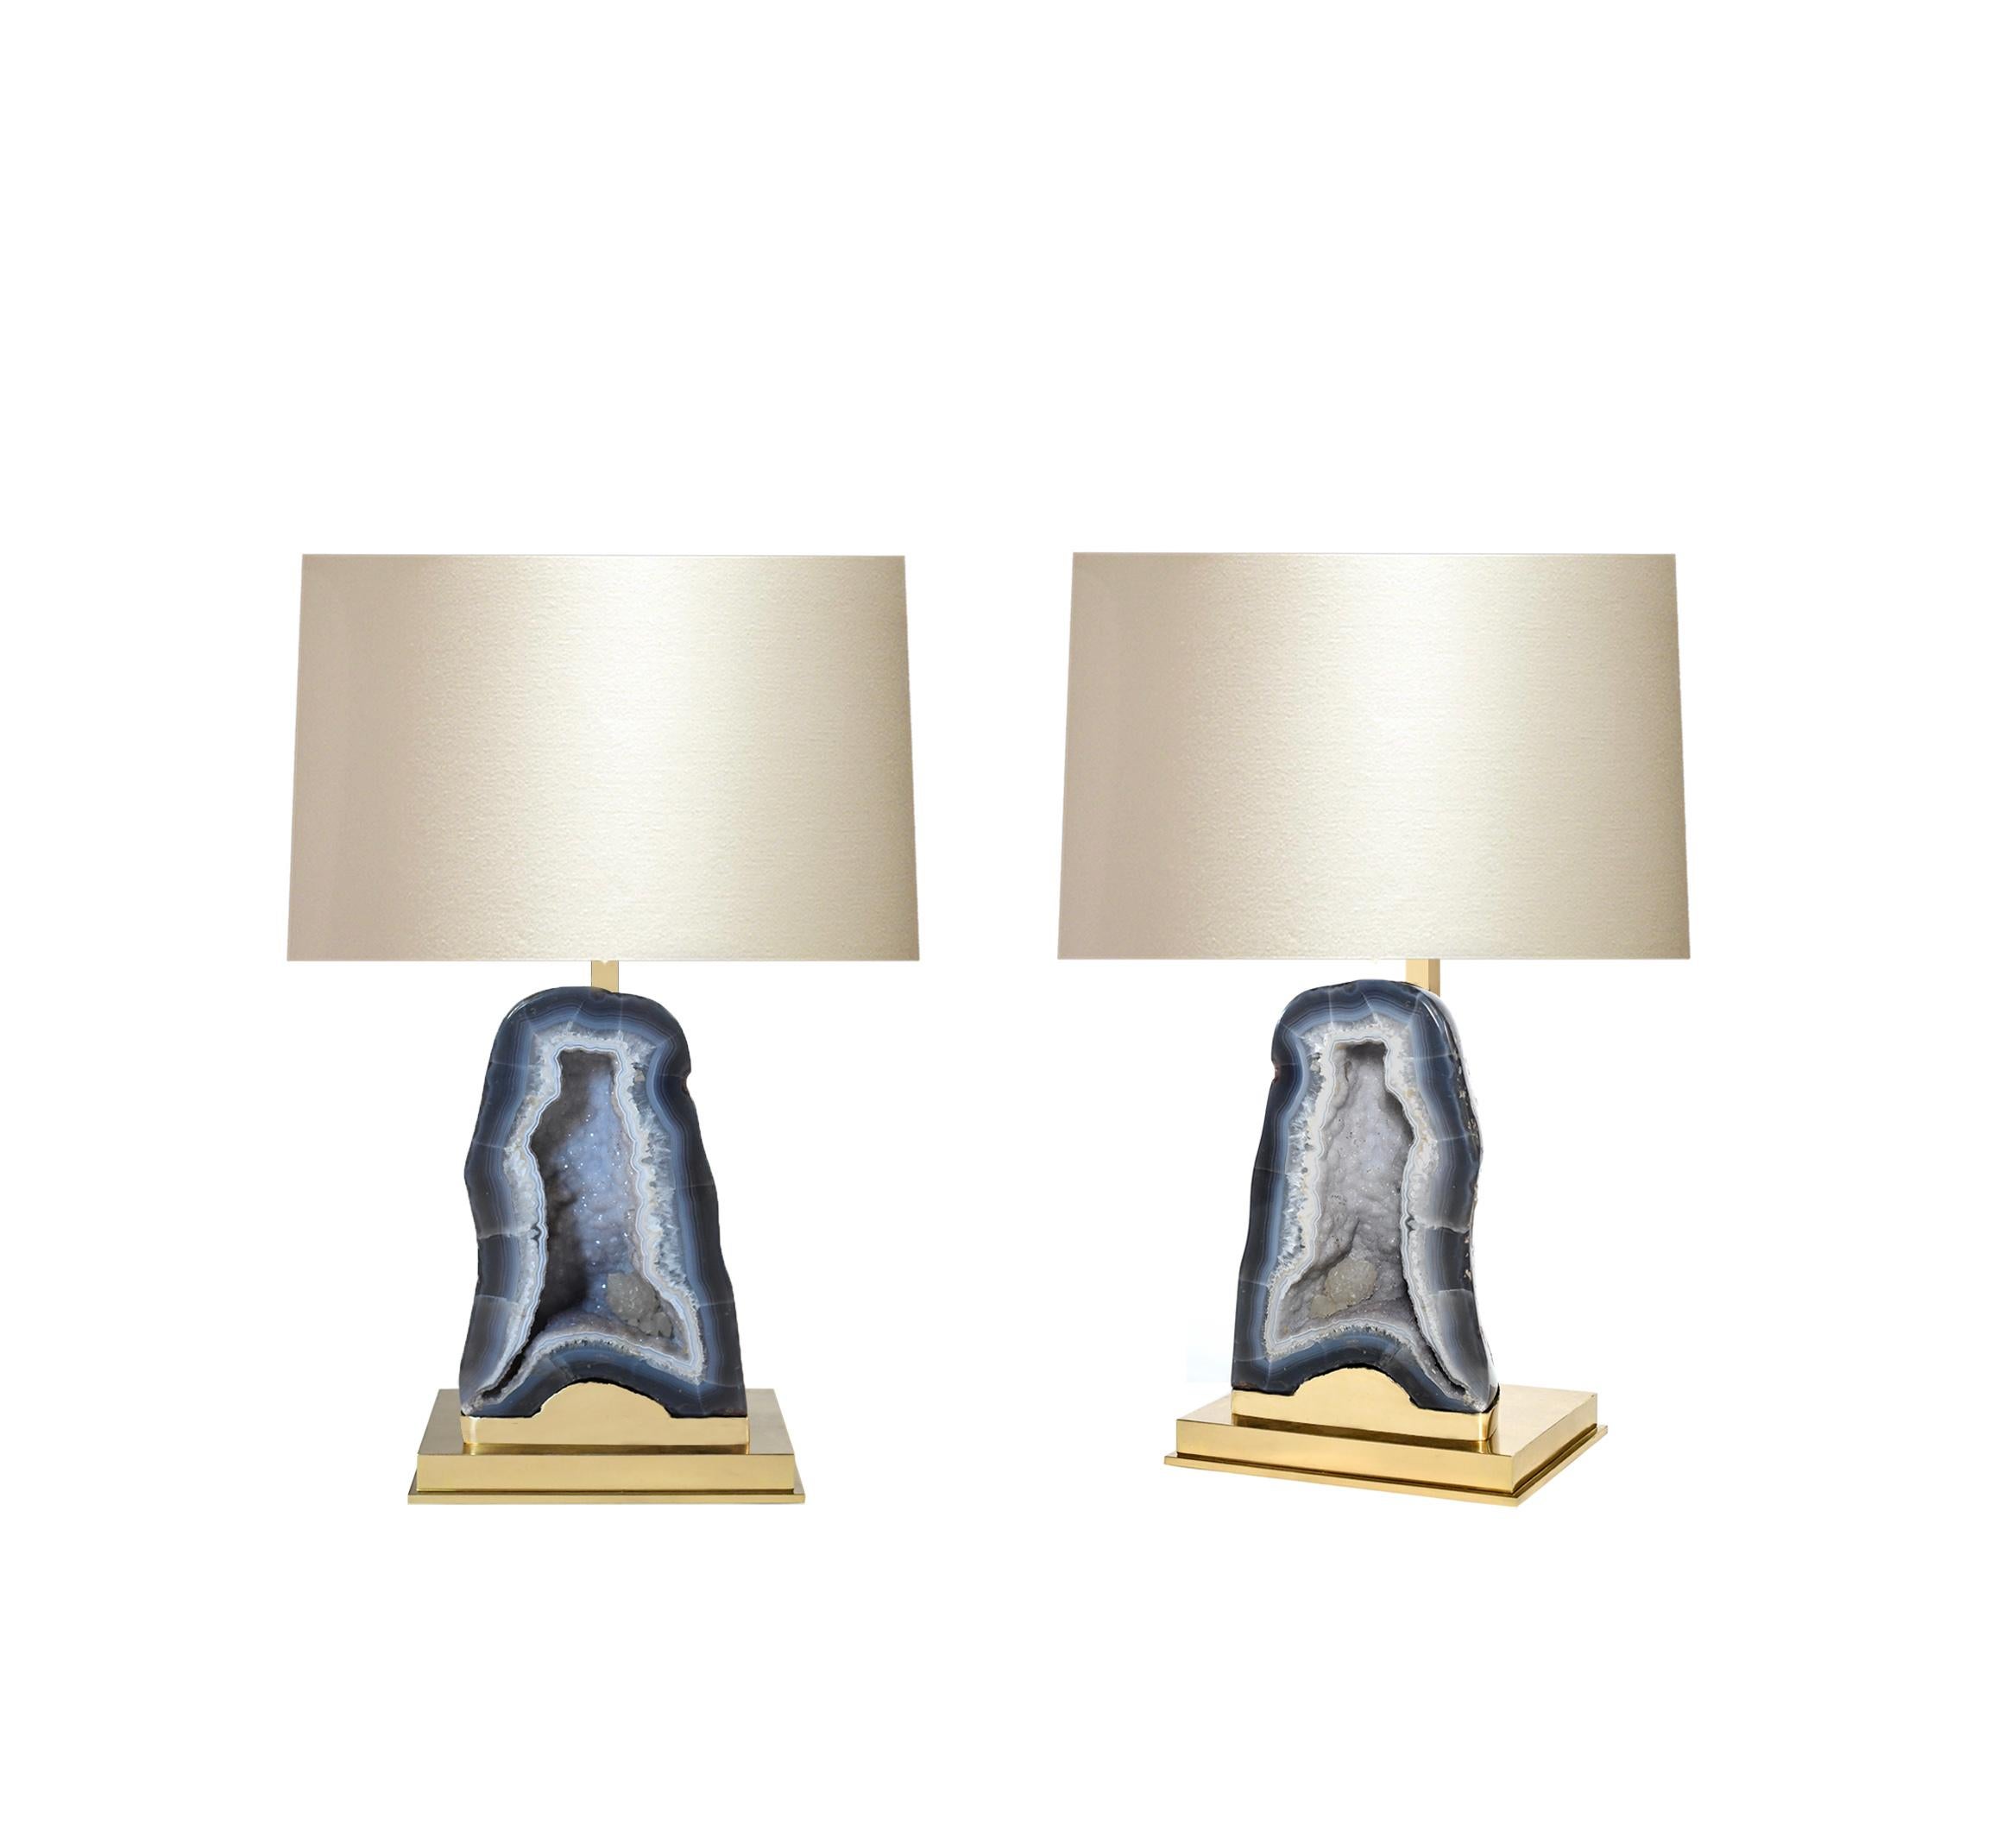 Pair of beautiful natural agates mount as lamps with custom polished brass bases.
To the top of agate: 10.5